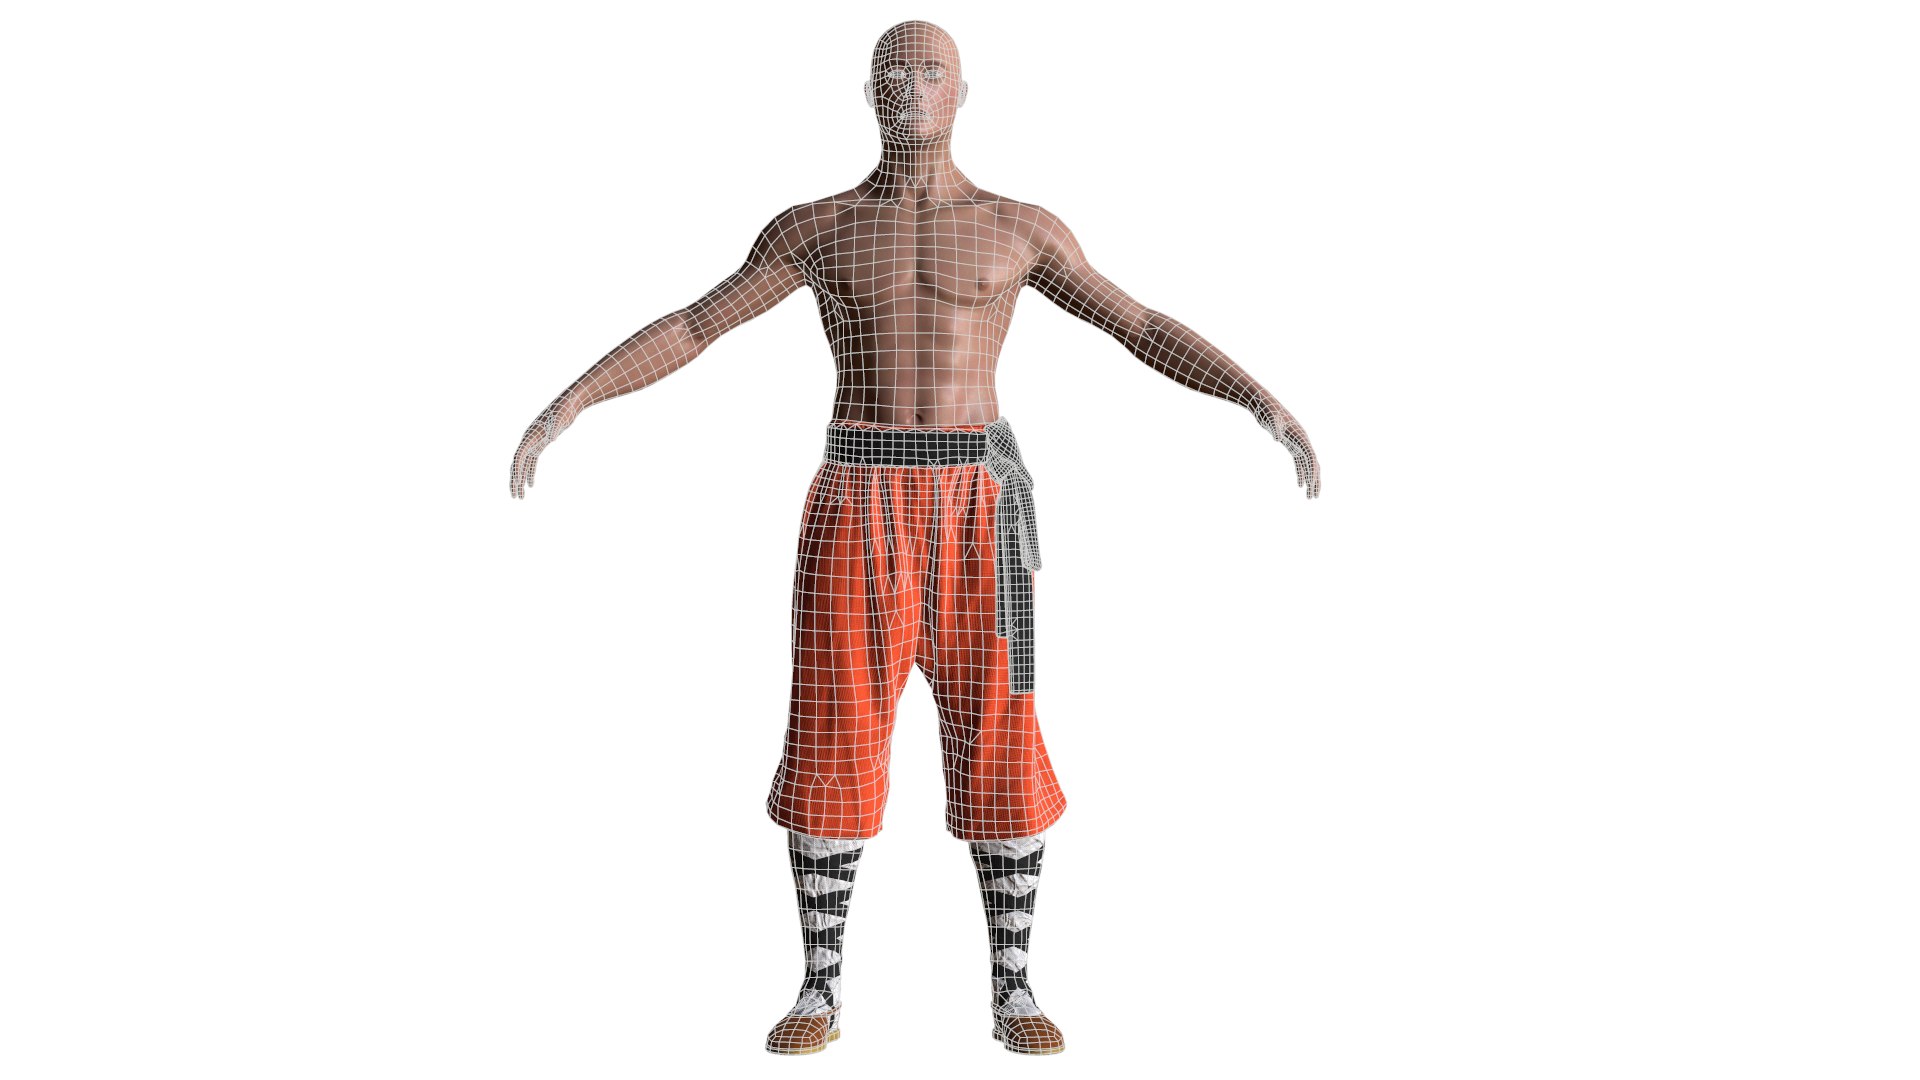 Shaolin Monk - Game Ready Character Low-poly 3D Model - TurboSquid 1953866